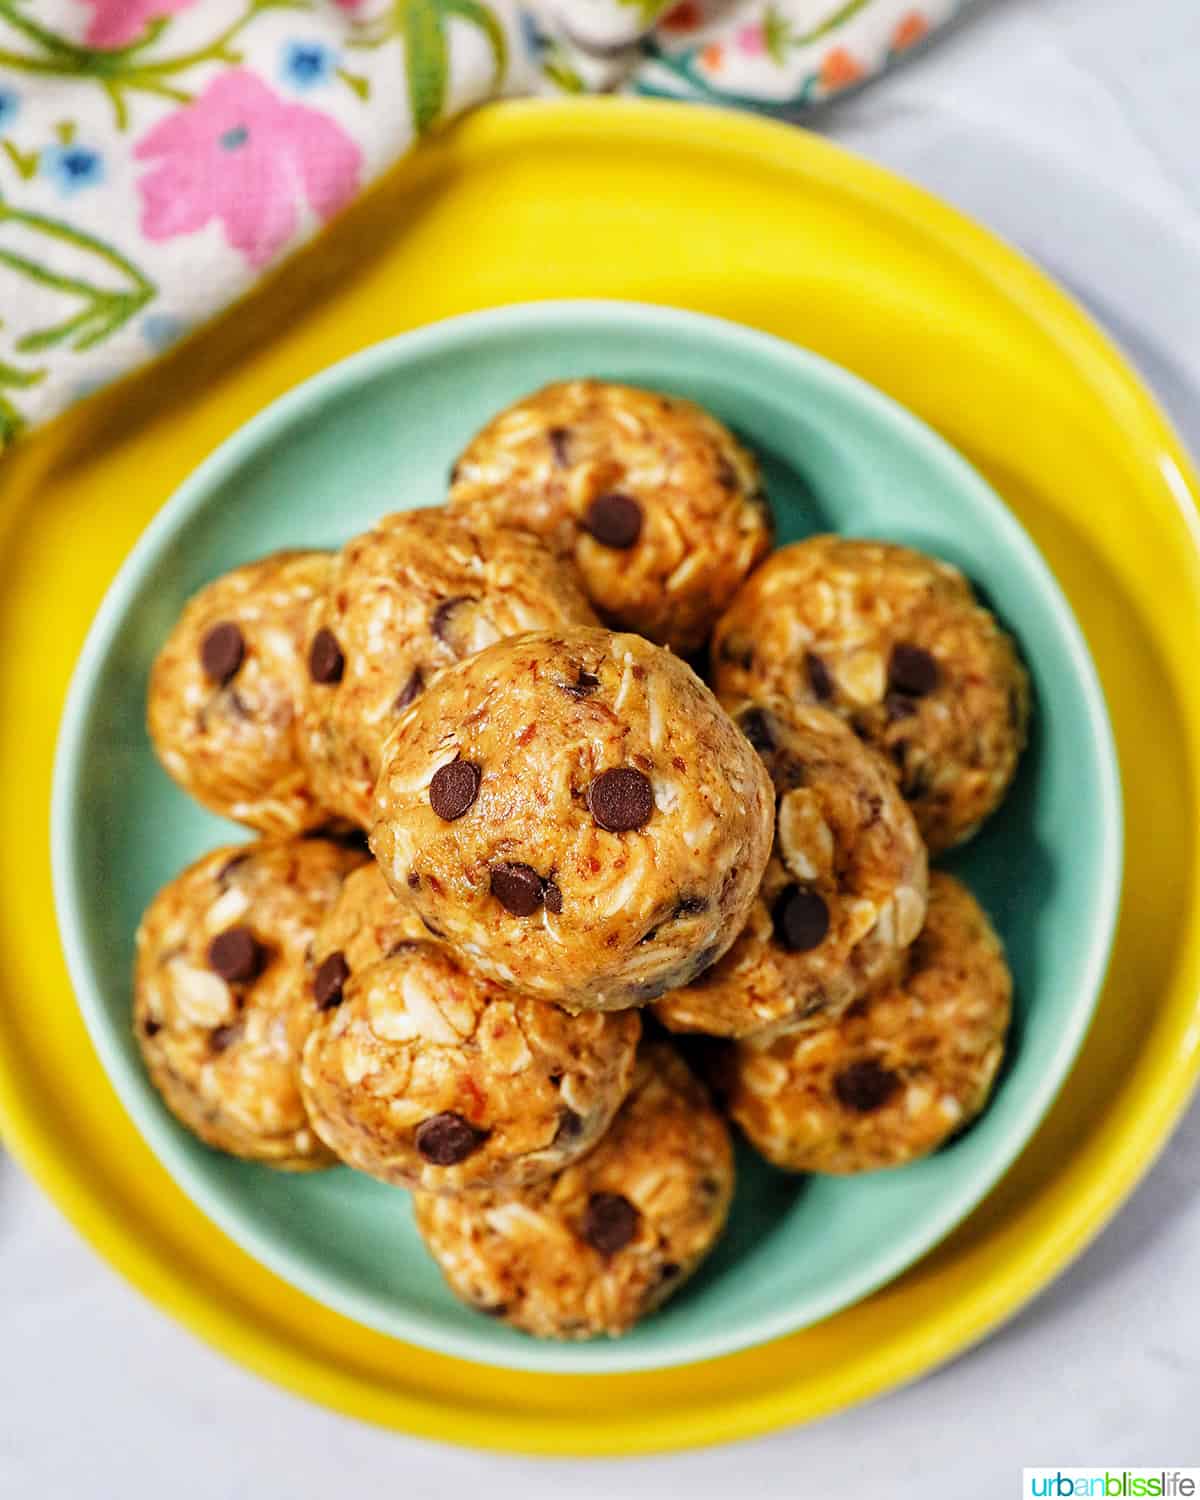 stack of Peanut Butter Chocolate Chip Oatmeal Balls on a green and yellow plate.